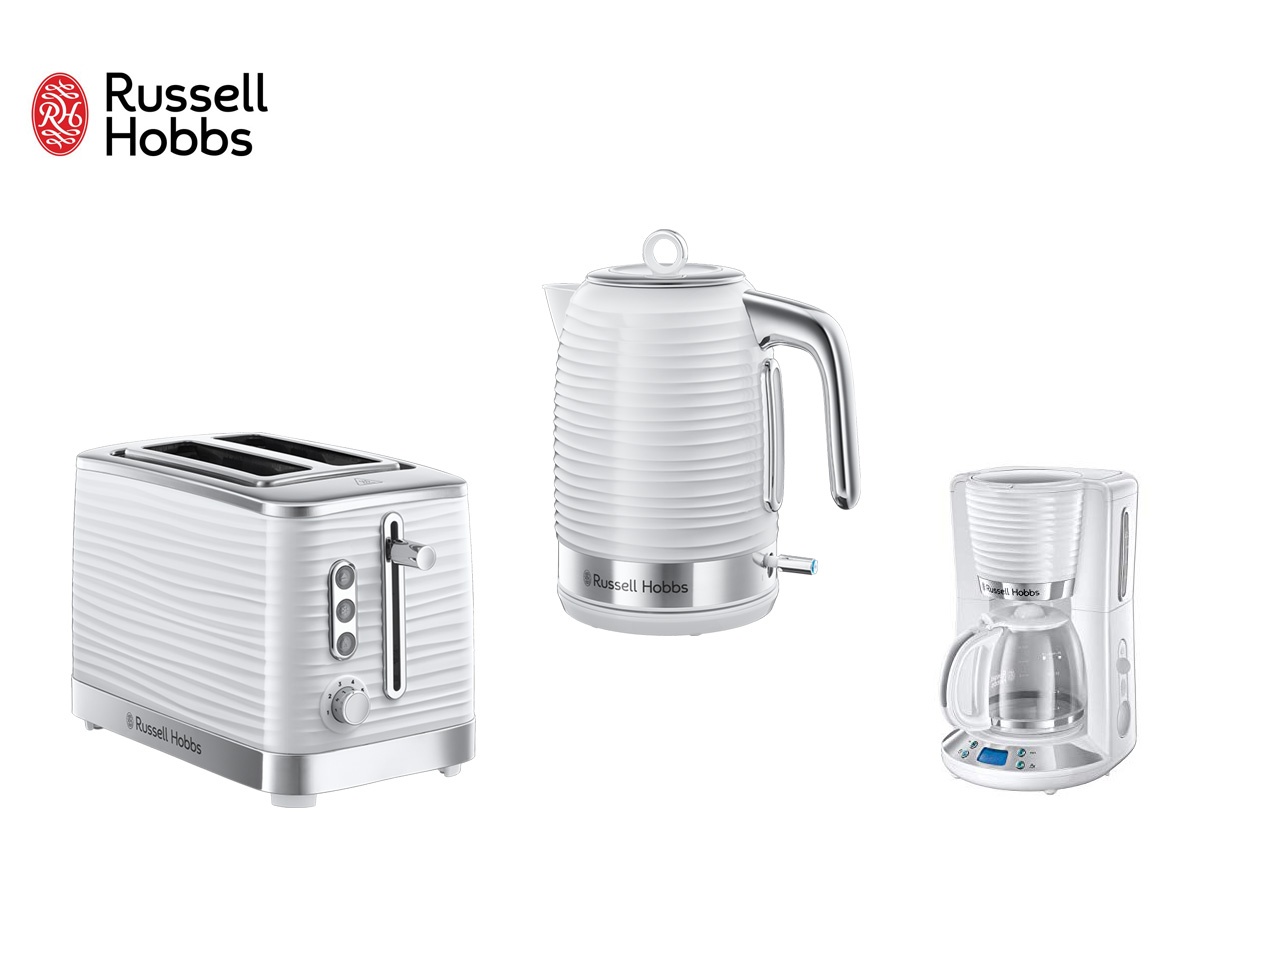 Russell Hobbs lance une nouvelle gamme Inspire